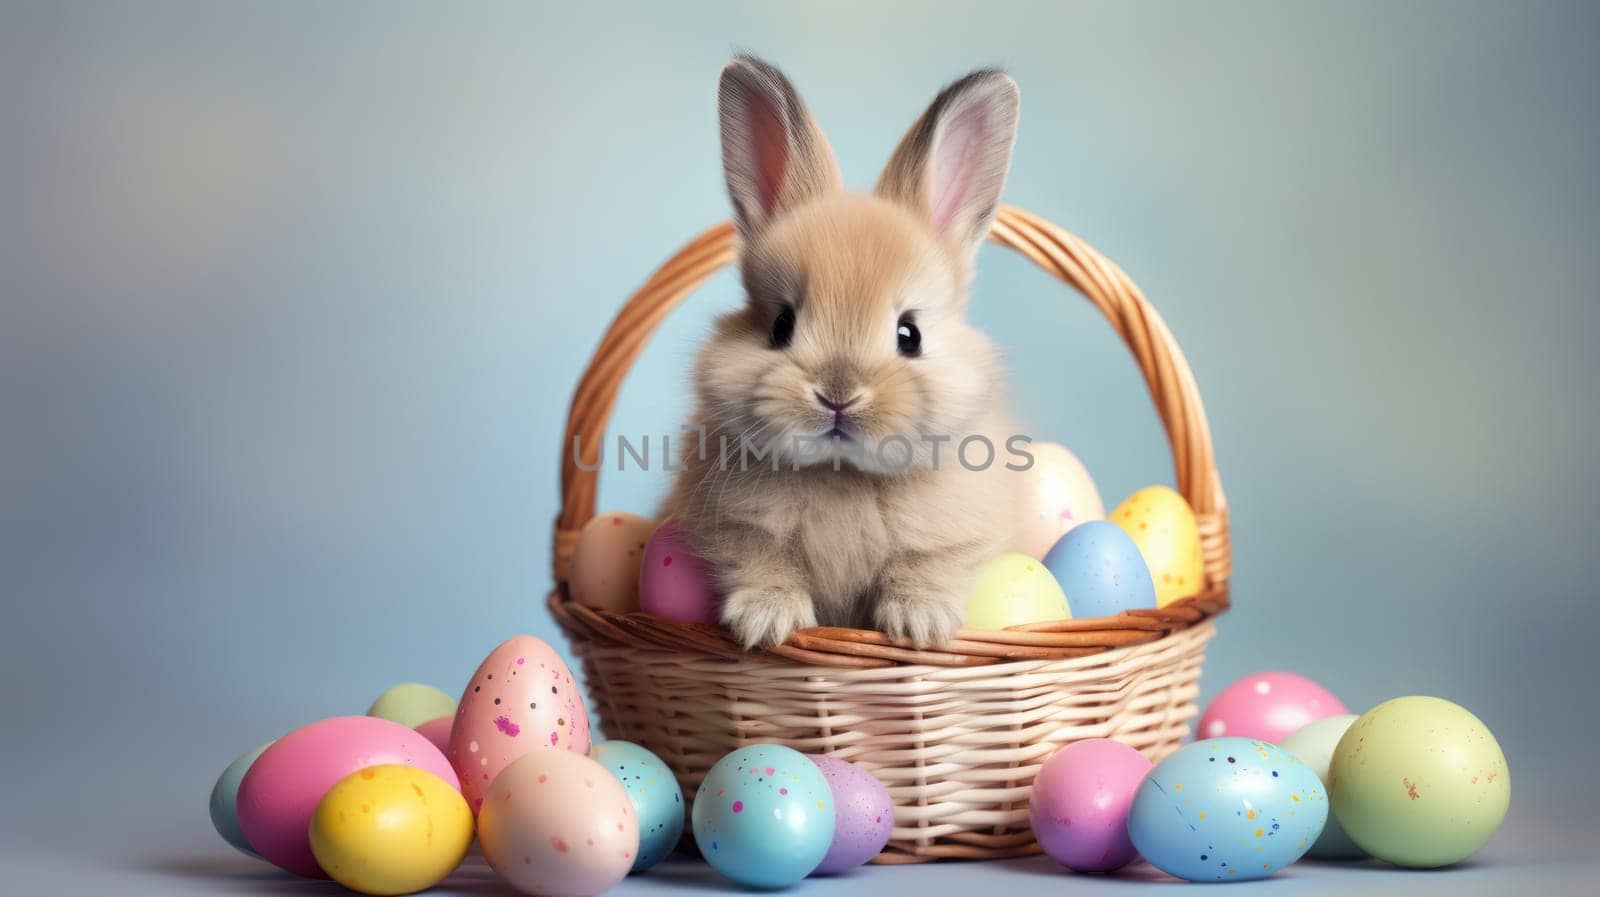 A fluffy white rabbit with long ears in a basket surrounded by Easter eggs on a blue background. Curious expression, vibrant colors. Ideal for Easter or spring projects.